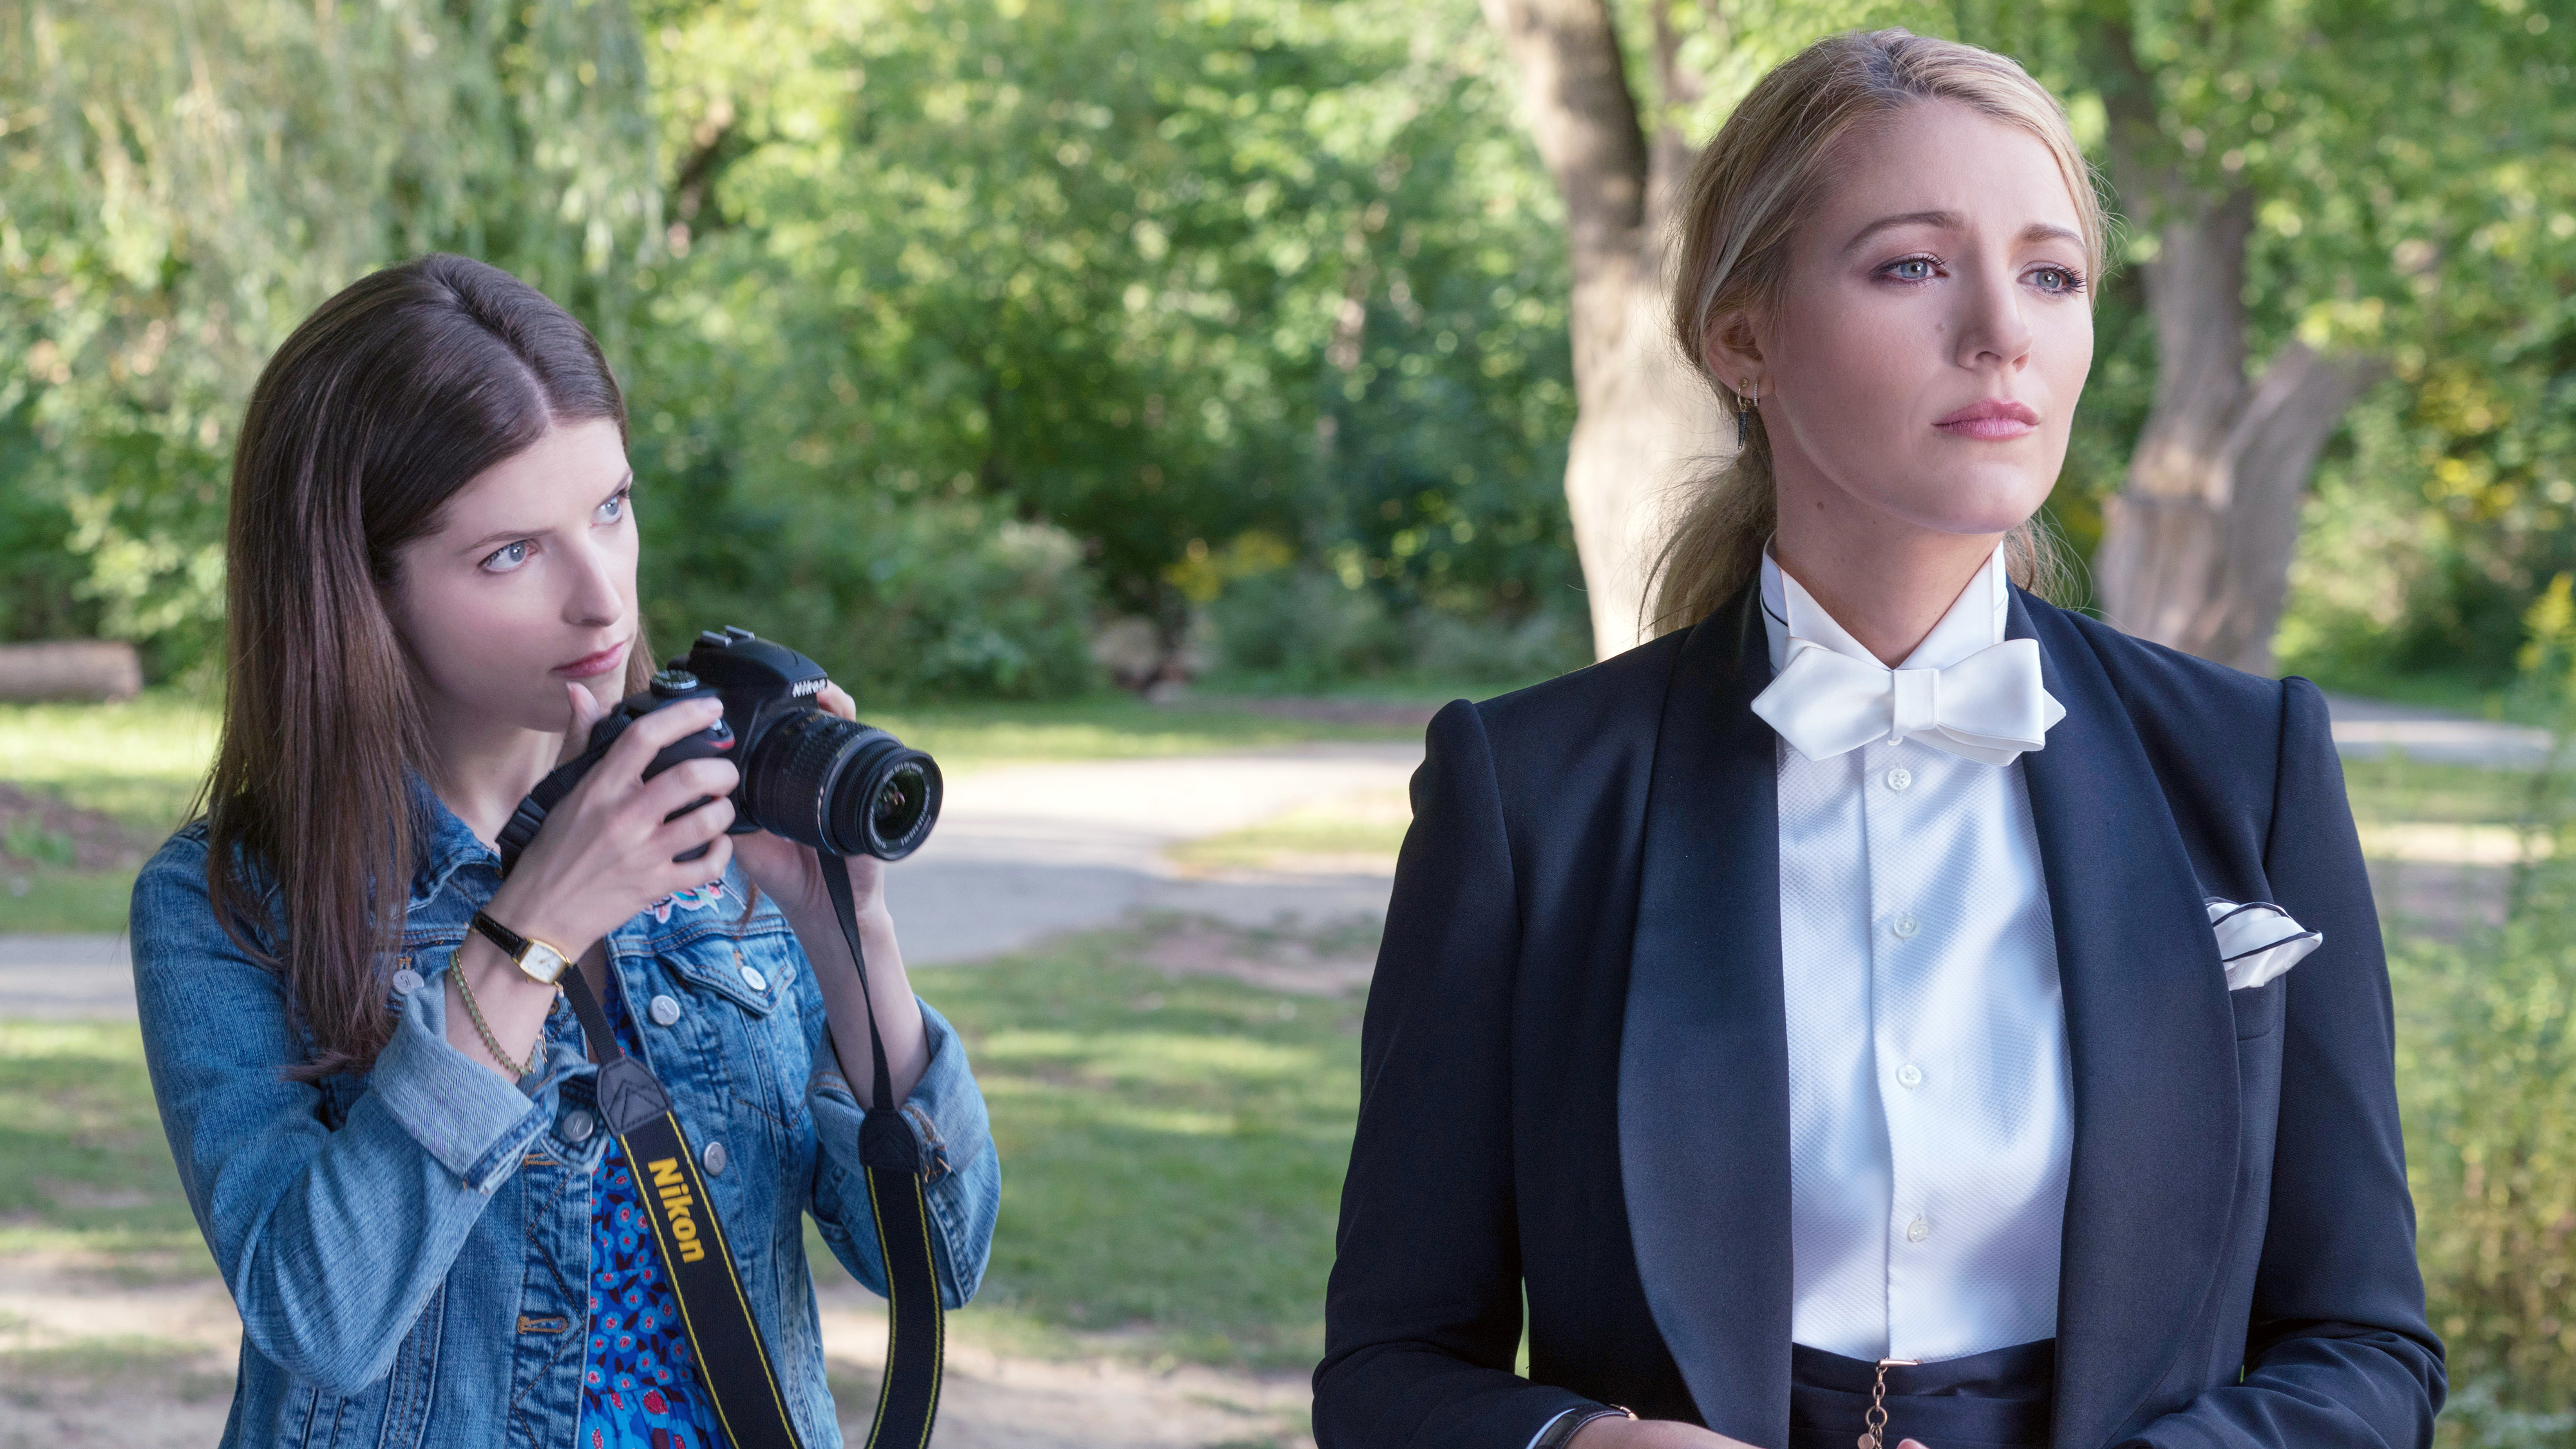 Stephanie holding a camera, and Emily in a formal suit with a bow